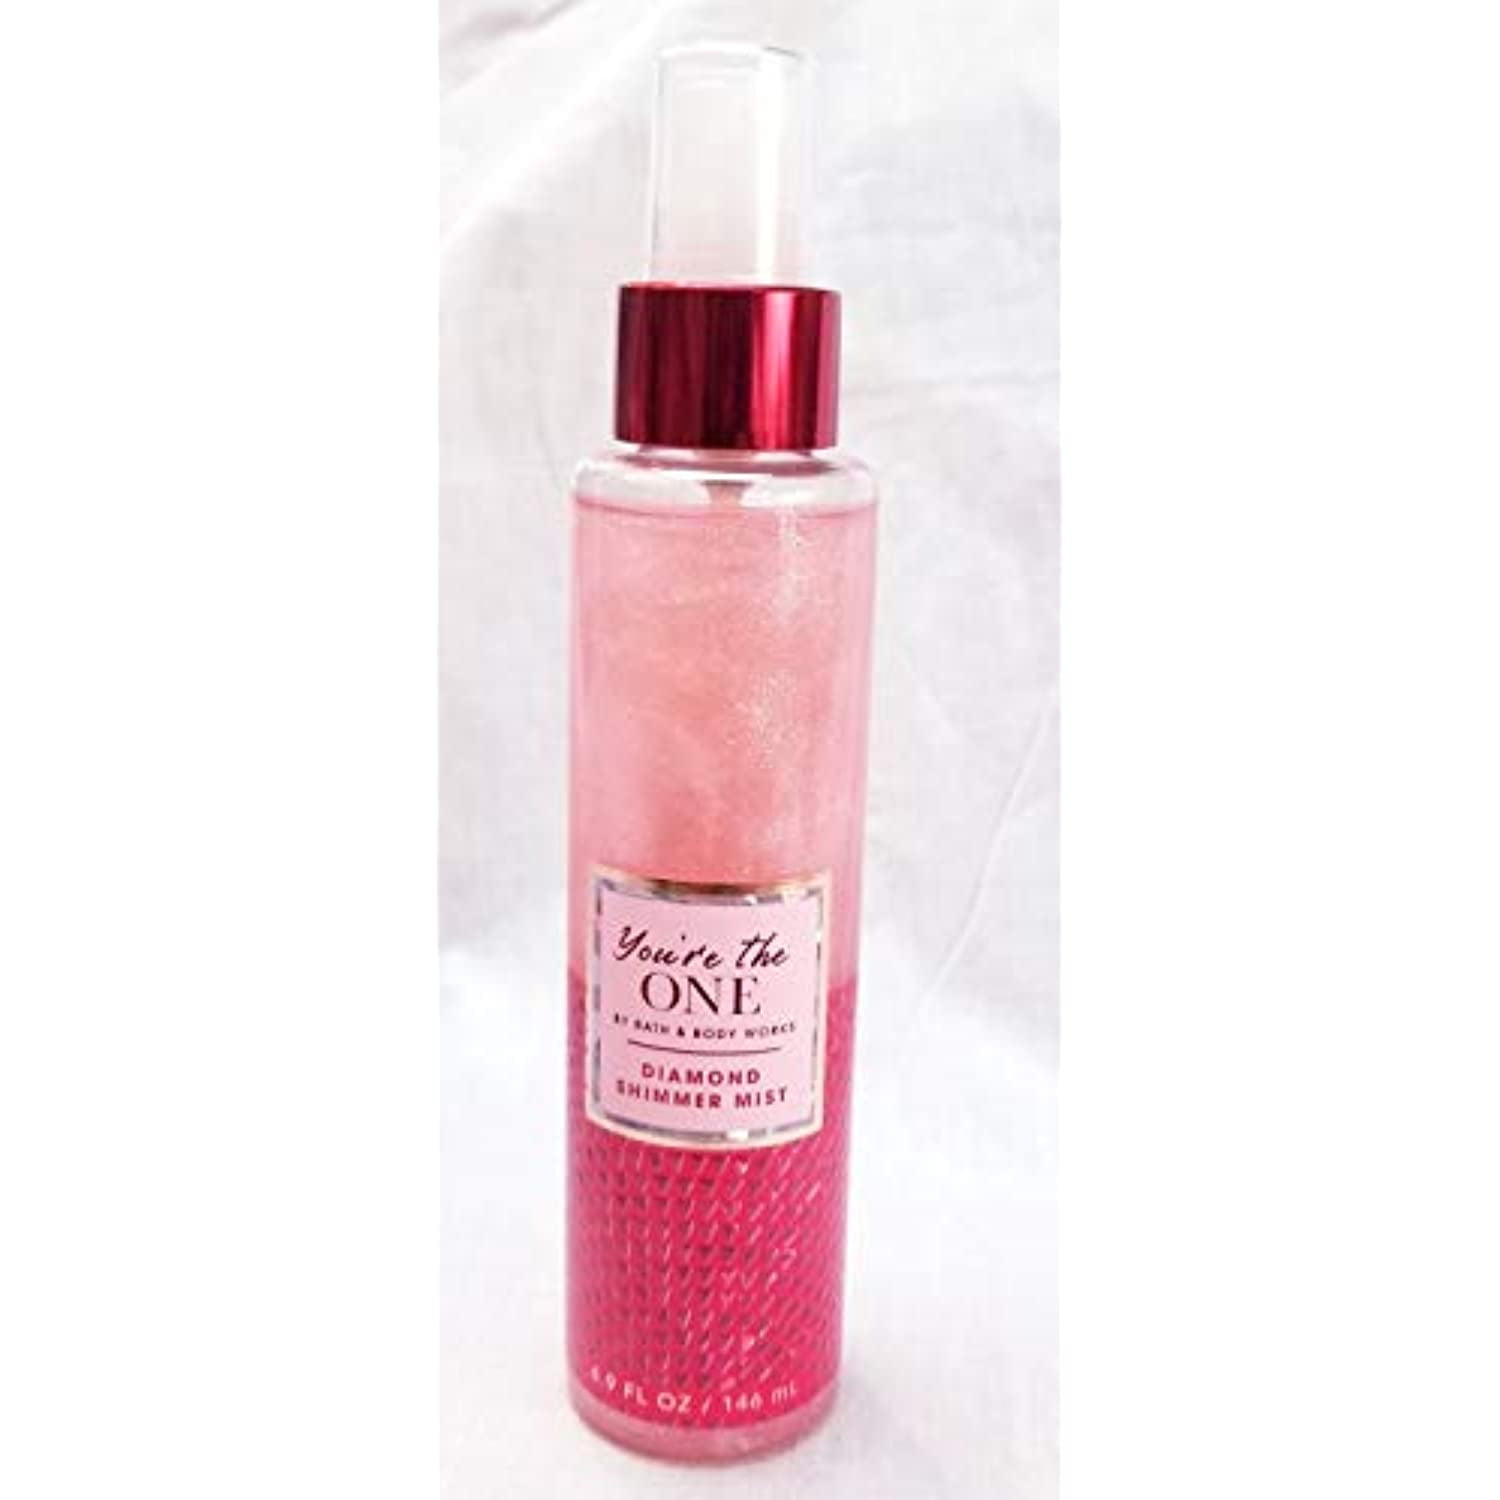 Bath & Body Works Bath & Body | You're The One Diamond Shimmer Mist | Color: Pink | Size: 4.9 oz | Erinnorrell's Closet